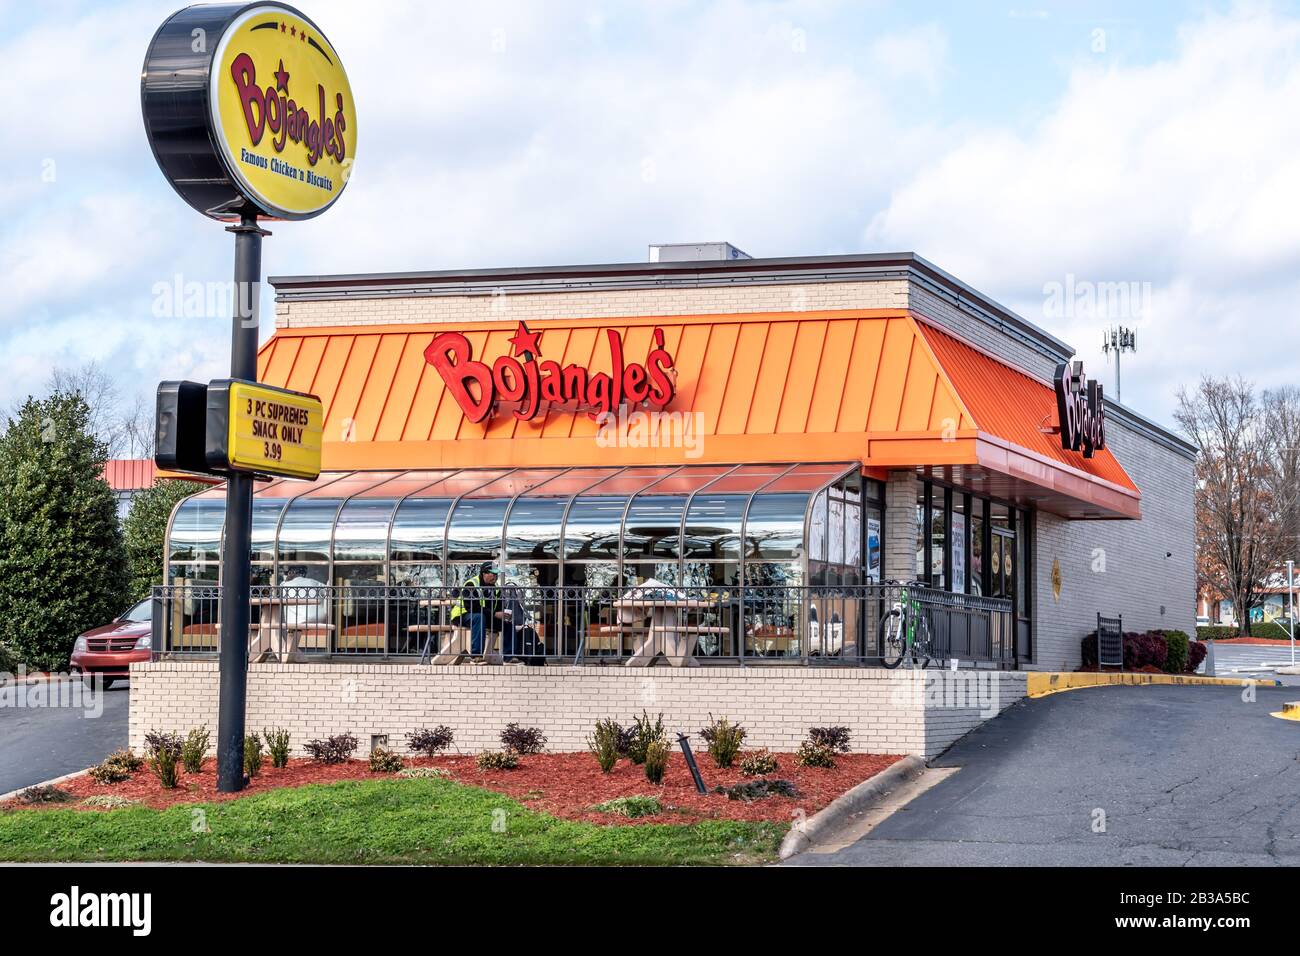 Charlotte, NC/USA - February 1, 2020: Medium exterior view of 'Bojangle's Famous Chicken & Biscuits' restaurant showing brand/logo on sign and store. Stock Photo